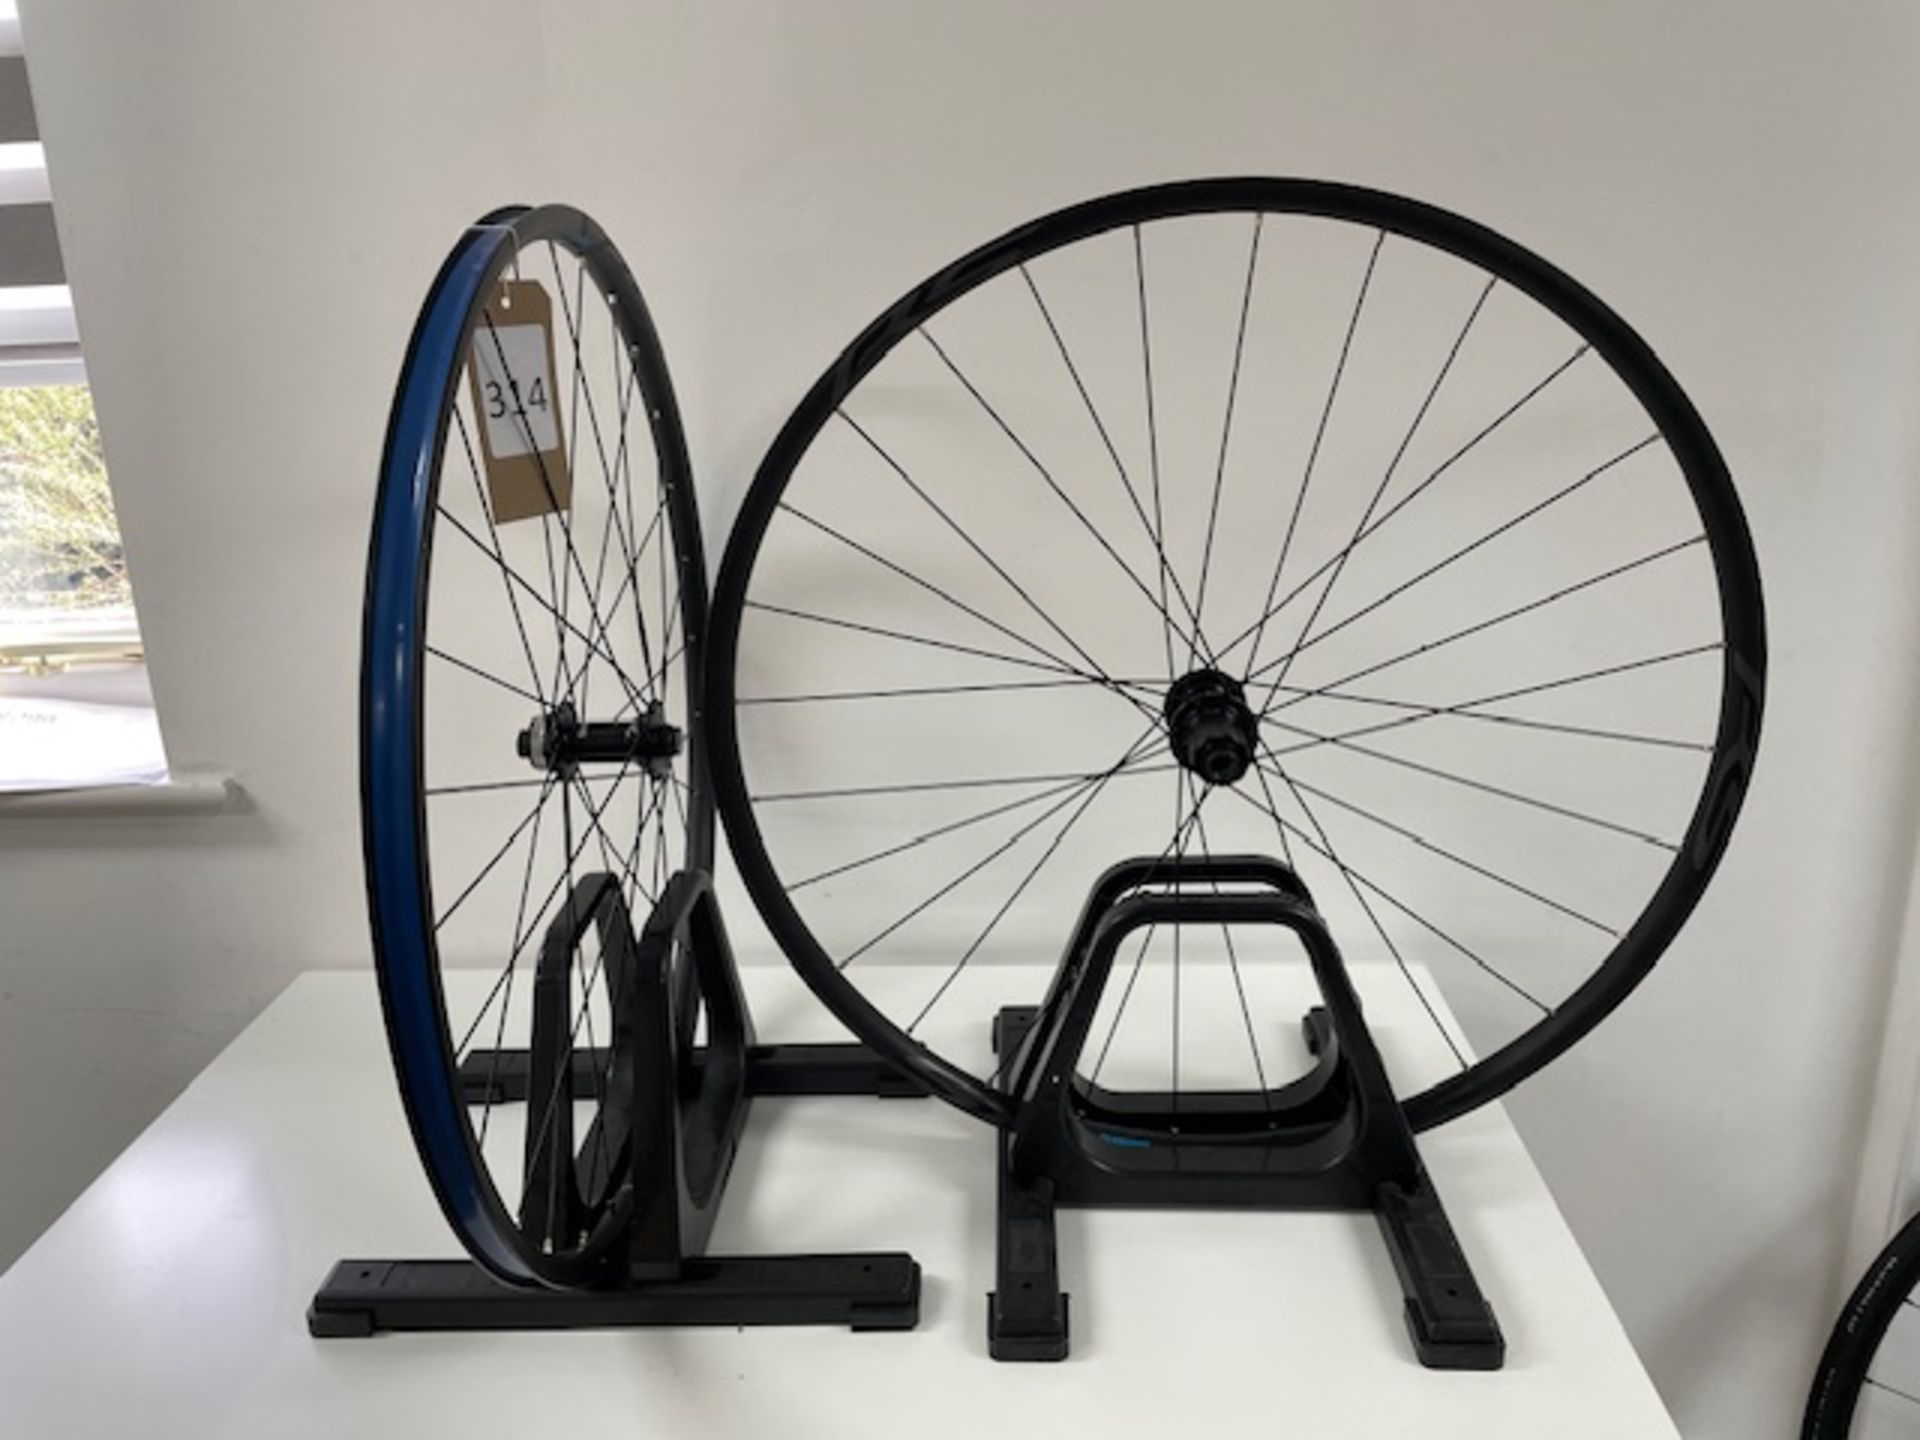 Pair Shimano “RS171” Wheels, 700c with Shimano Freehub (Location: Newport Pagnell. Please Refer to